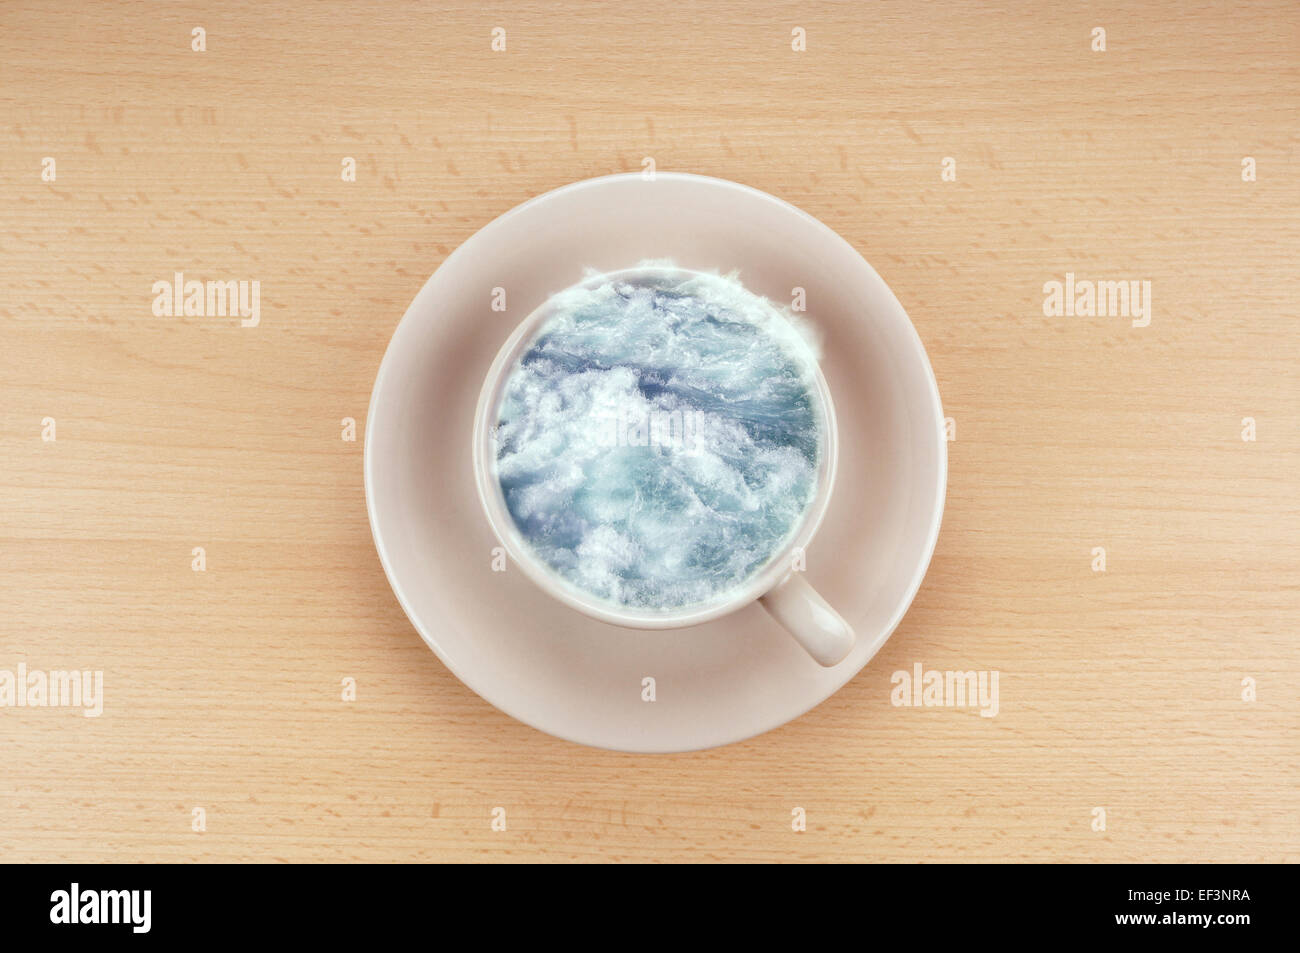 storm in a teacup Stock Photo